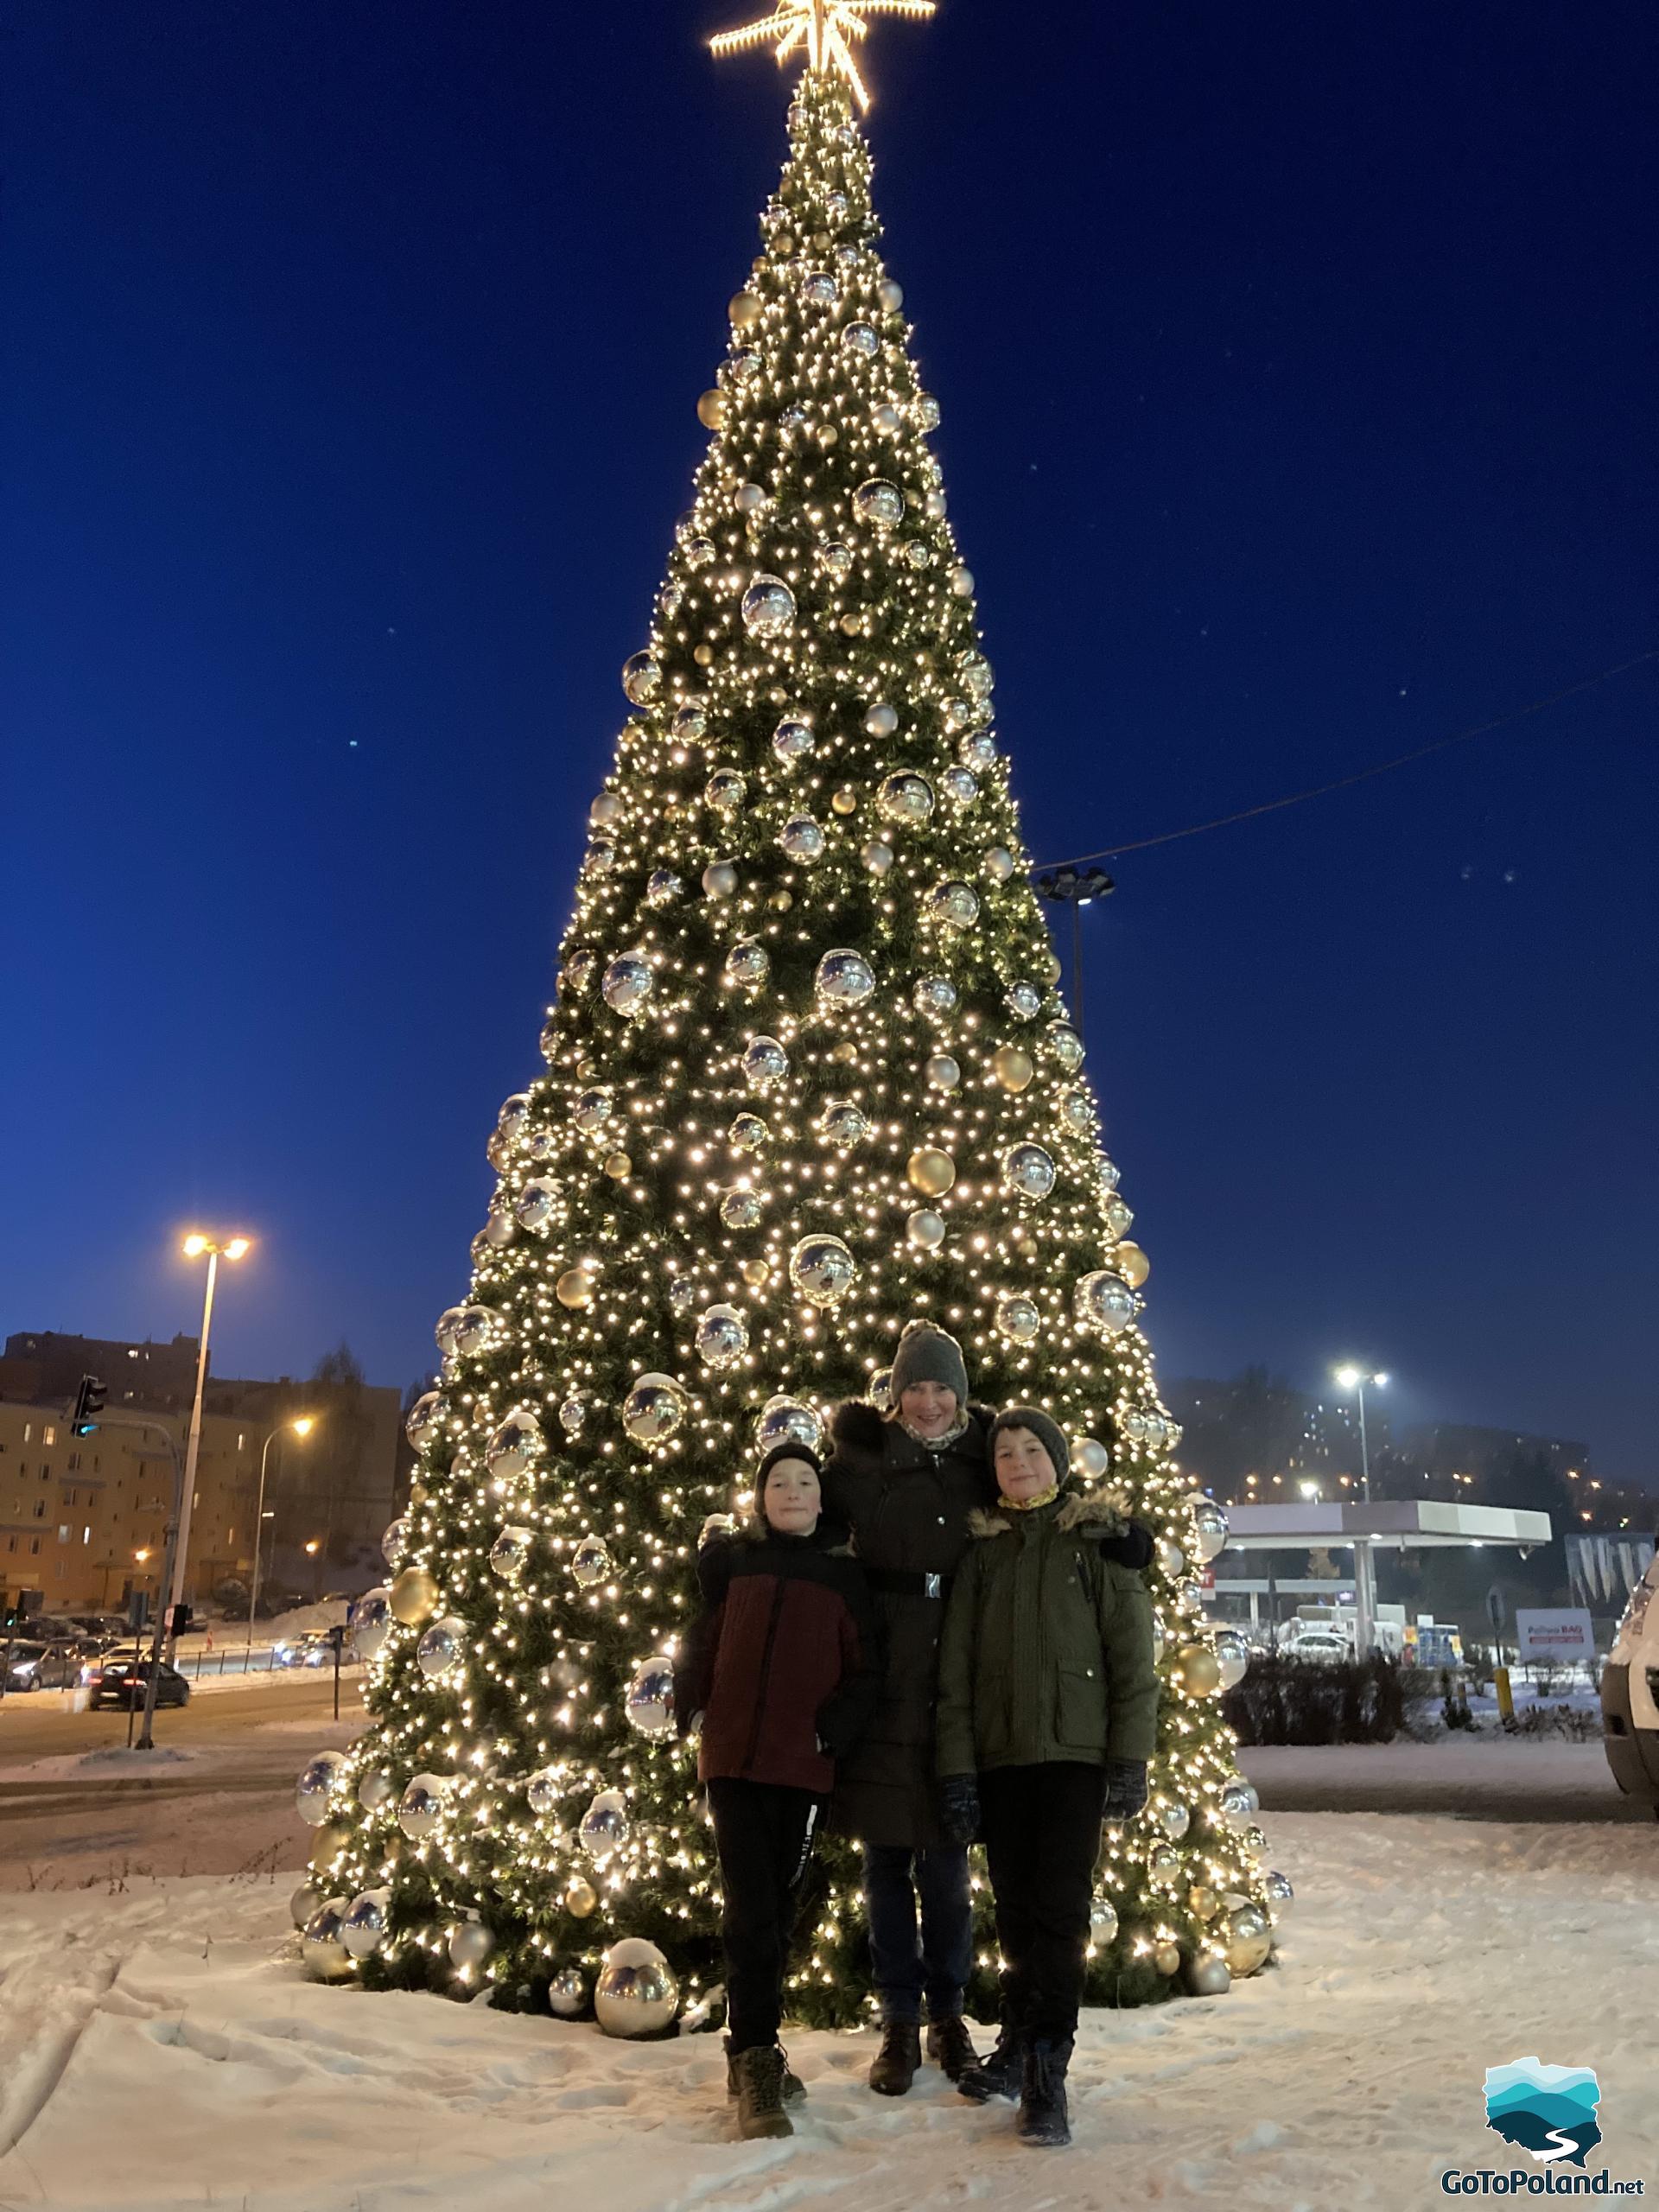 Very high Christmas tree with lots of christmas balls, a woman and two boys standing near this christmas tree